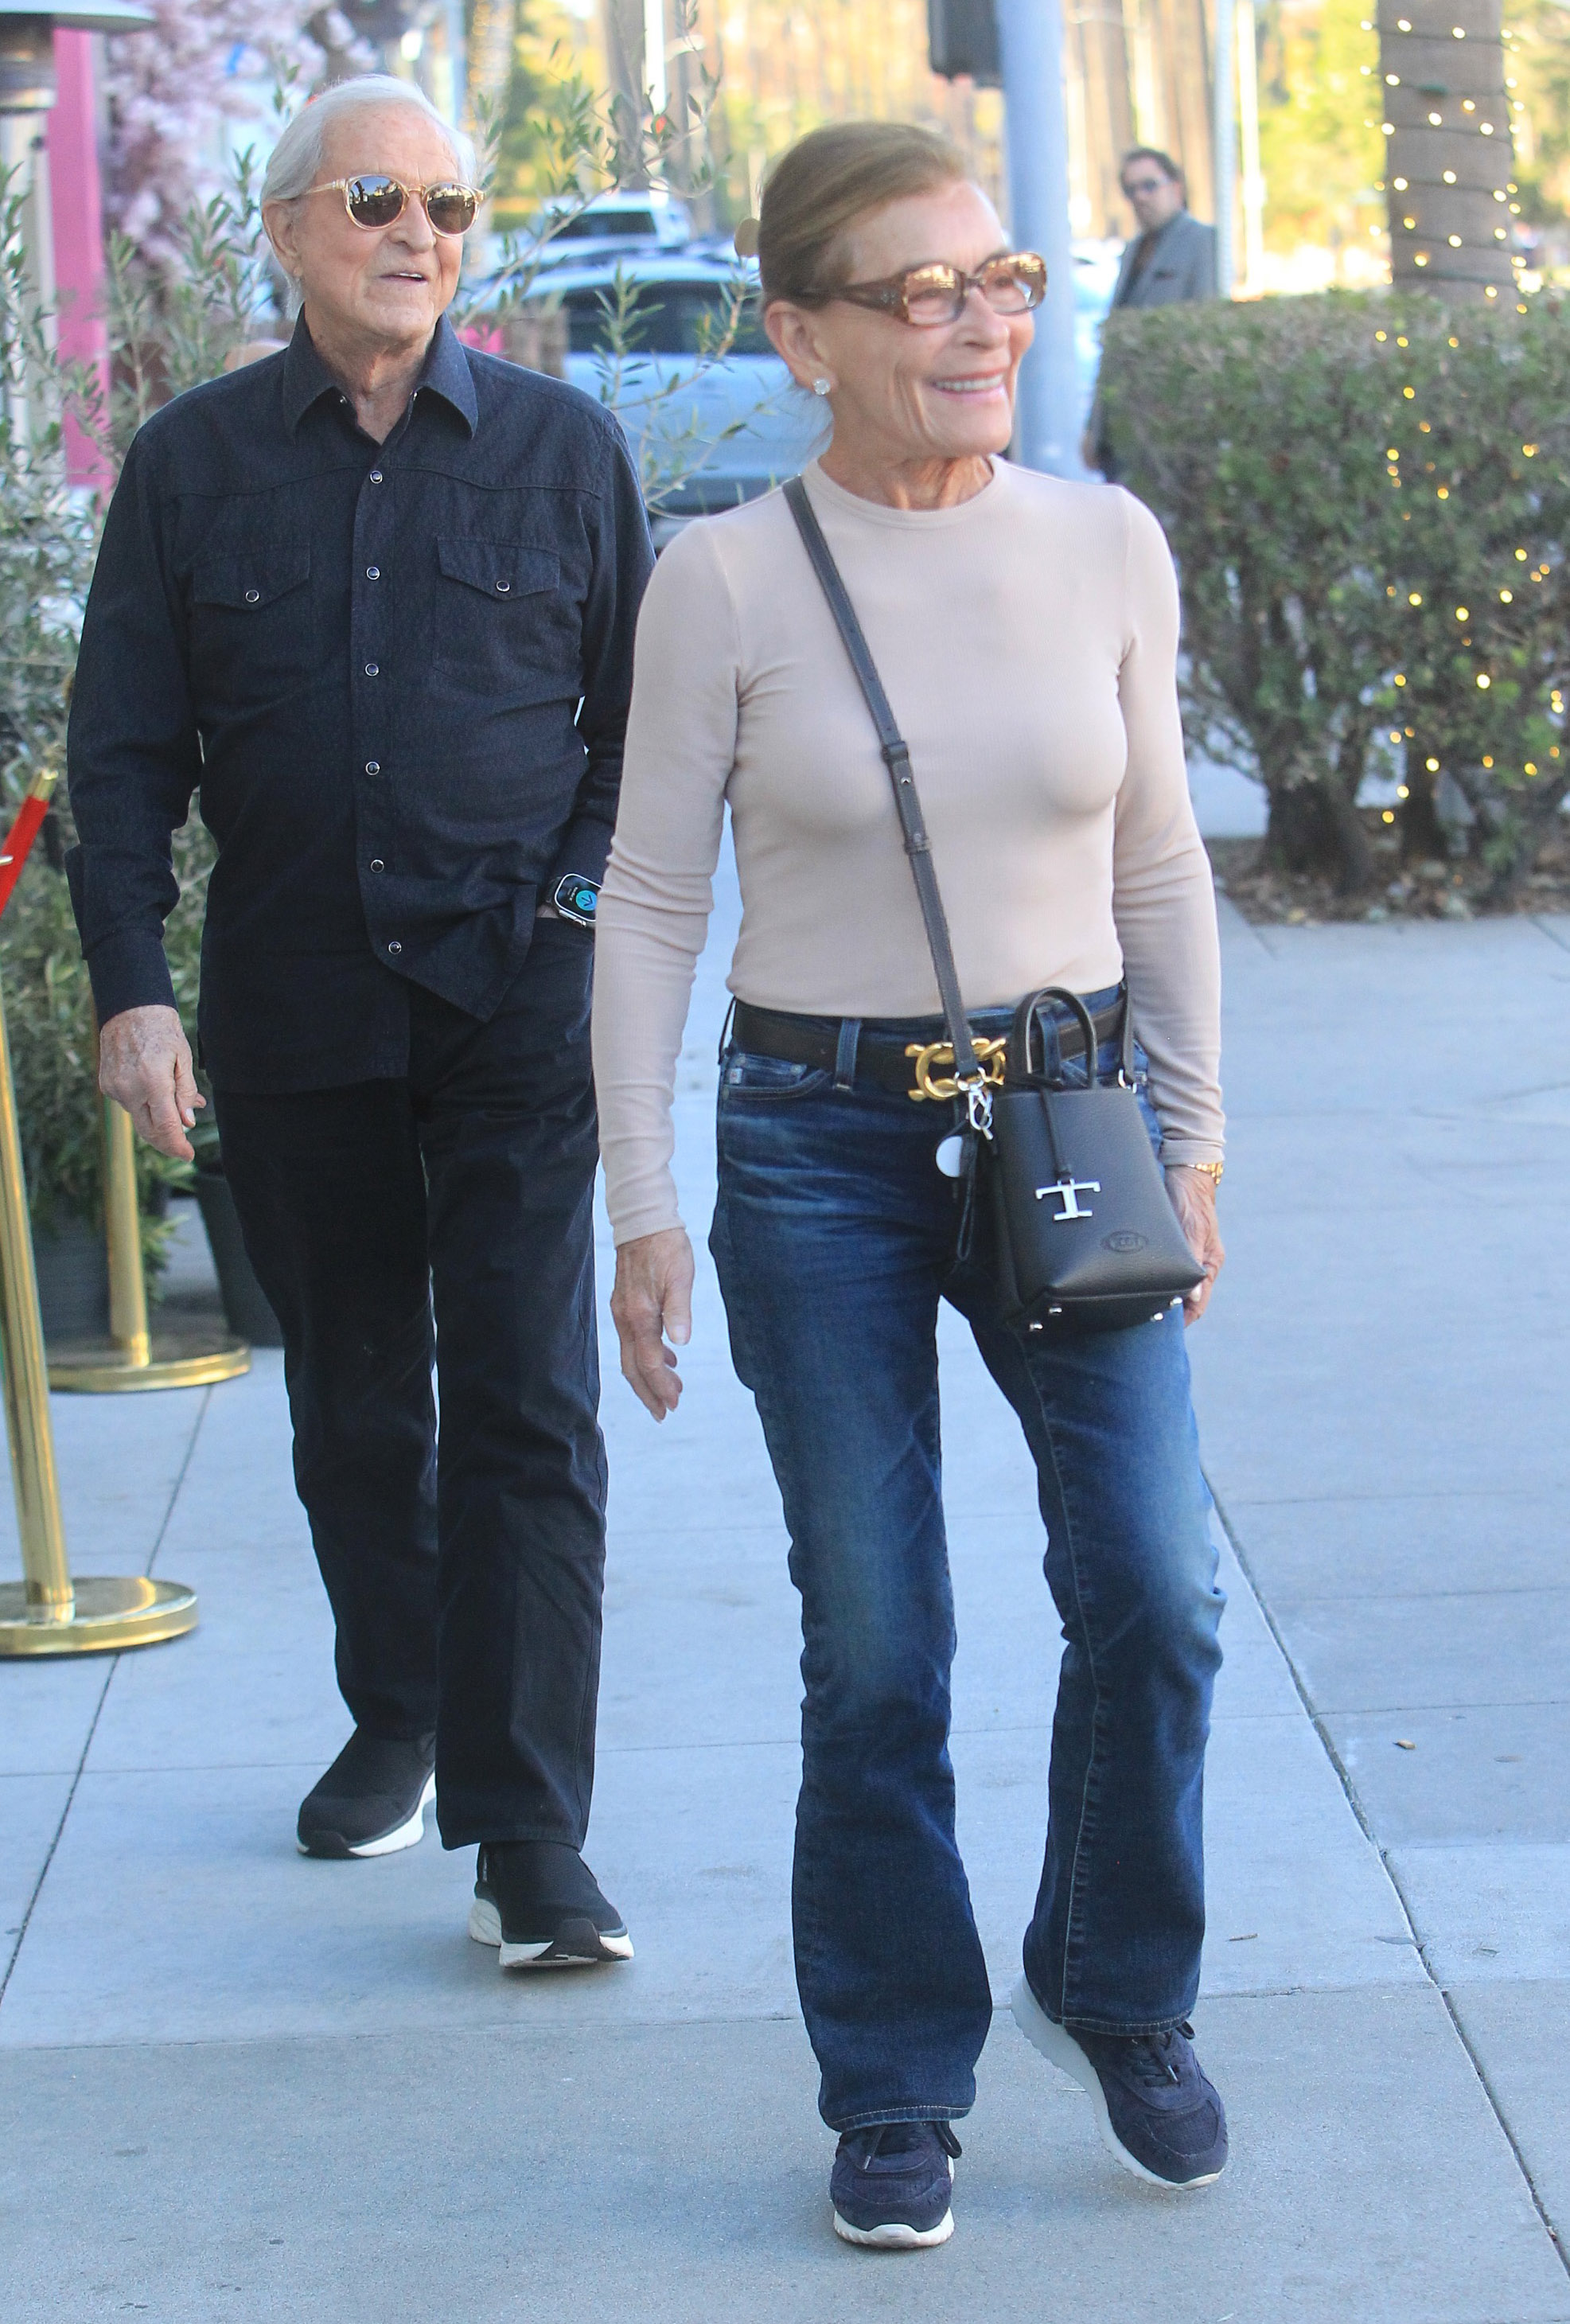 Judge Judy Sheindlin and her husband Jerry Sheindlin spotted in Los Angeles, California on November 22, 2022 | Source: Getty Images